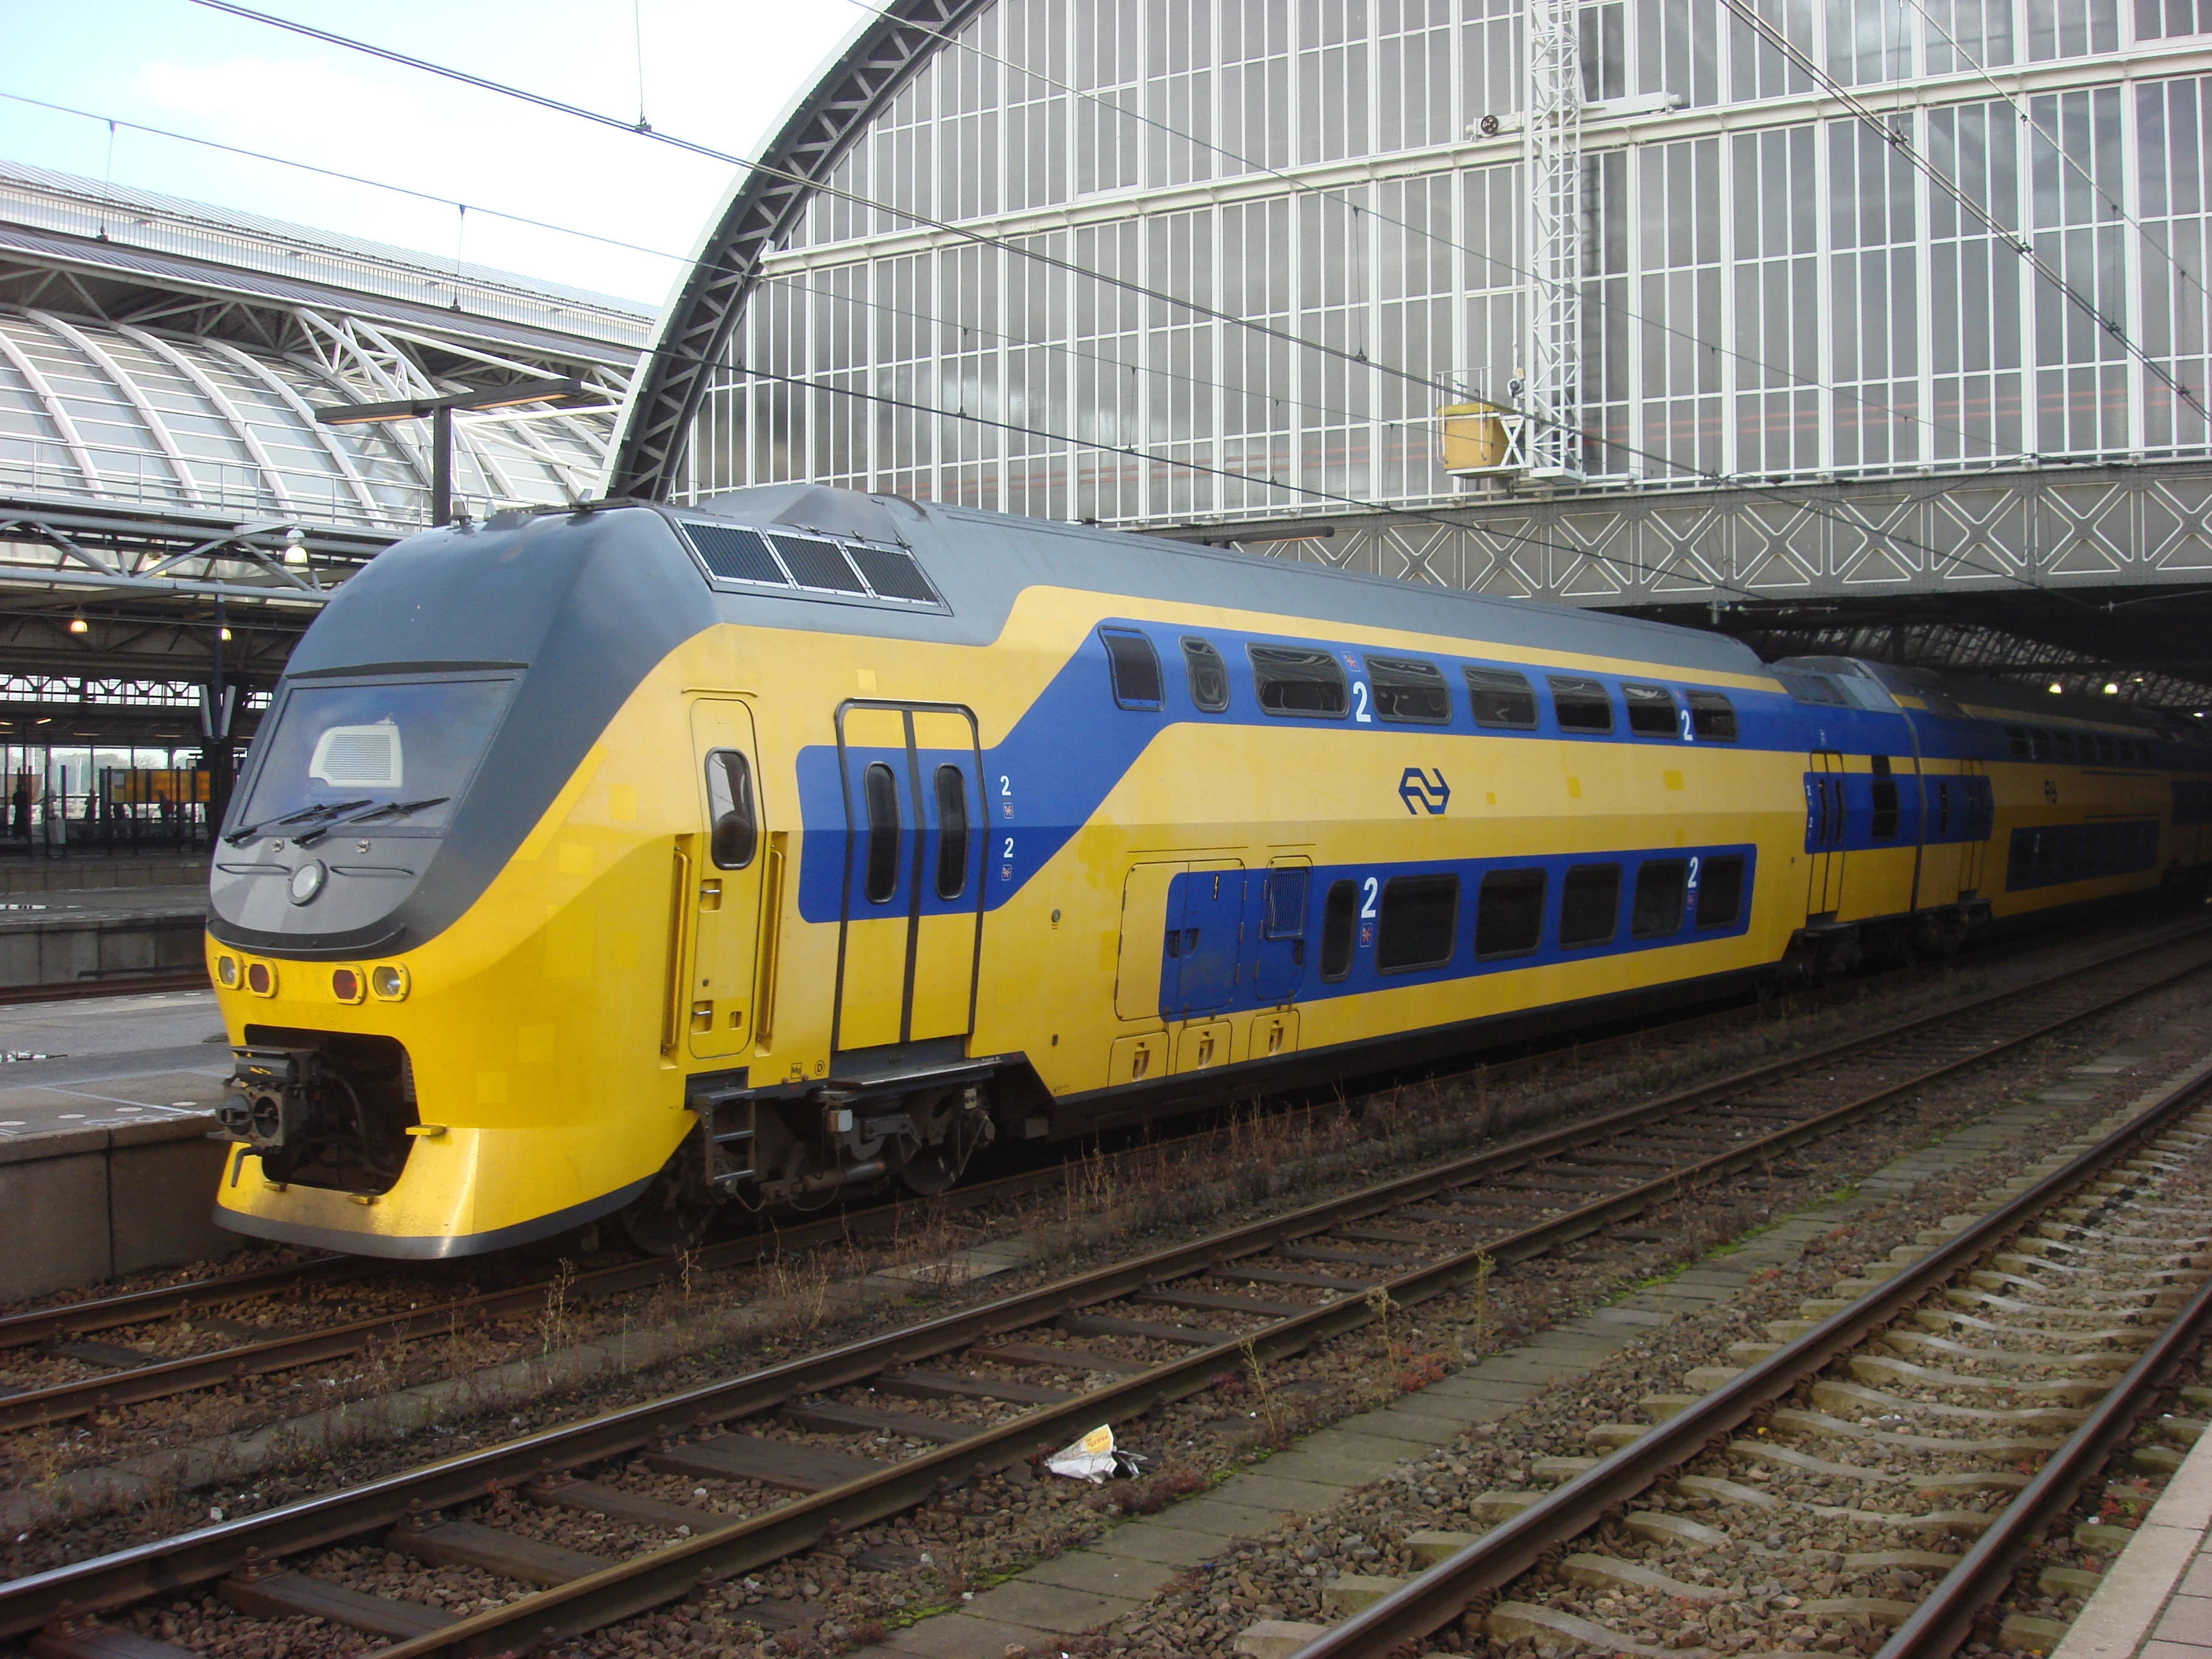 A Dutch train leaves the central station in Amsterdam